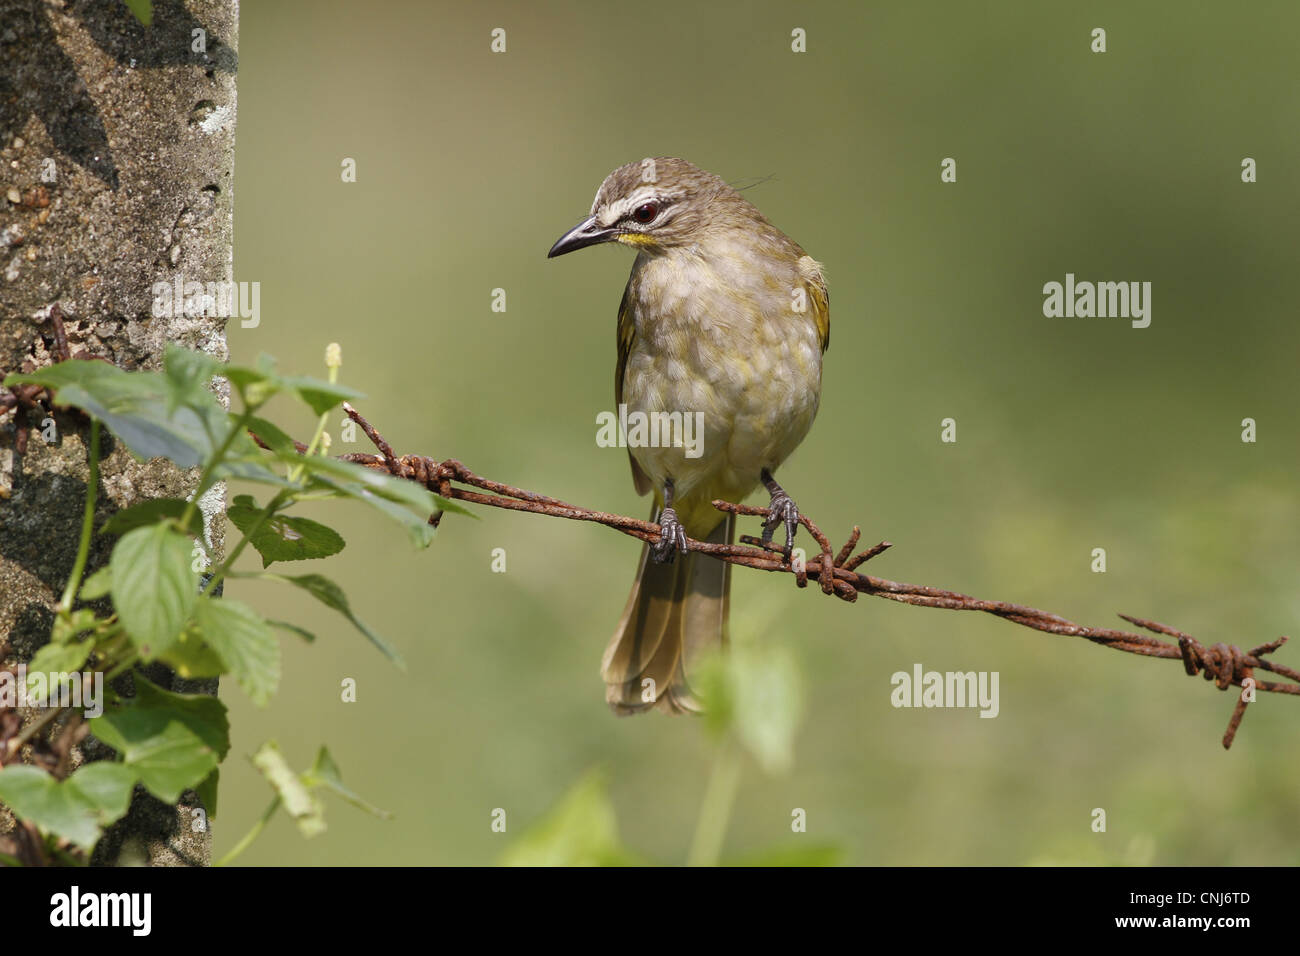 White-browed Bulbul (Pycnonotus luteolus) adult, perched on barbed wire fence, Sri Lanka Stock Photo